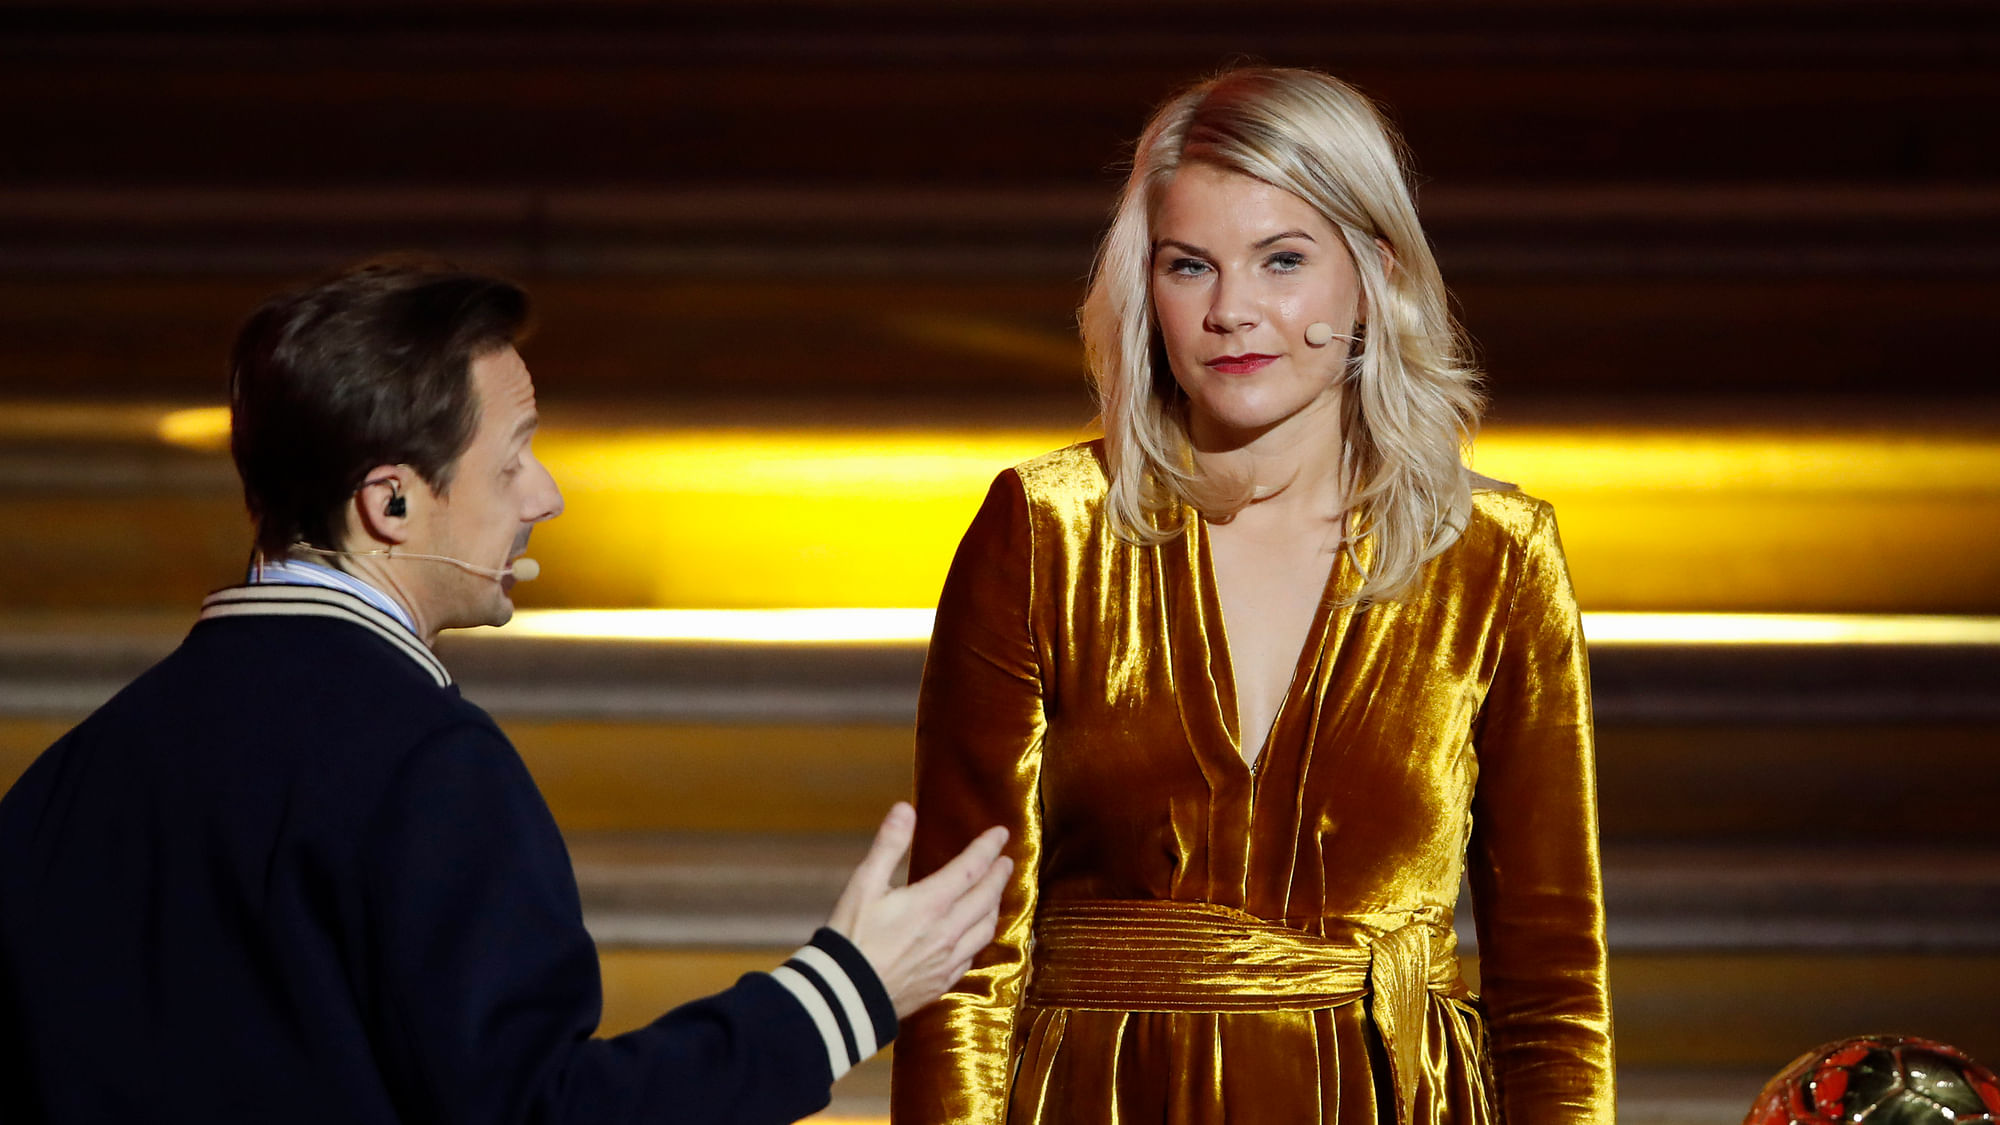 Norwegian striker Ada Hegerberg was asked to perform a “twerk” on stage after becoming the first-ever female recipient of the Ballon d’Or